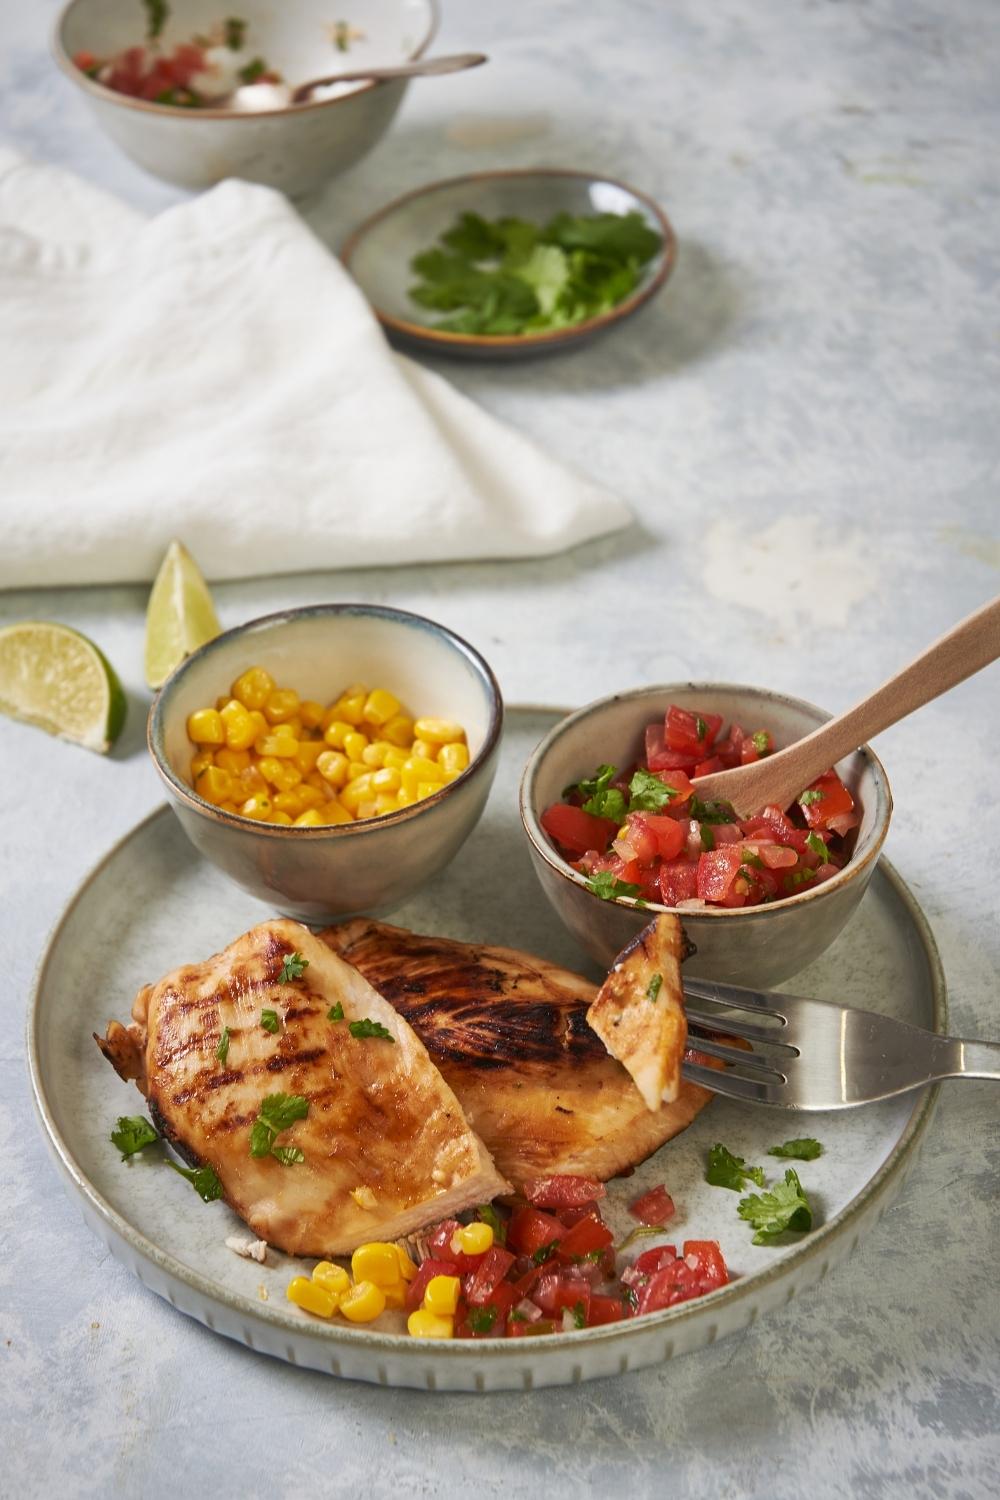 Chili's margarita chicken on a grey plate on a grey counter, with a fork grabbing a piece of chicken and containers of pico and corn are on the plate. There is a spoon in the pico and an assortment of ingredients behind the plate.